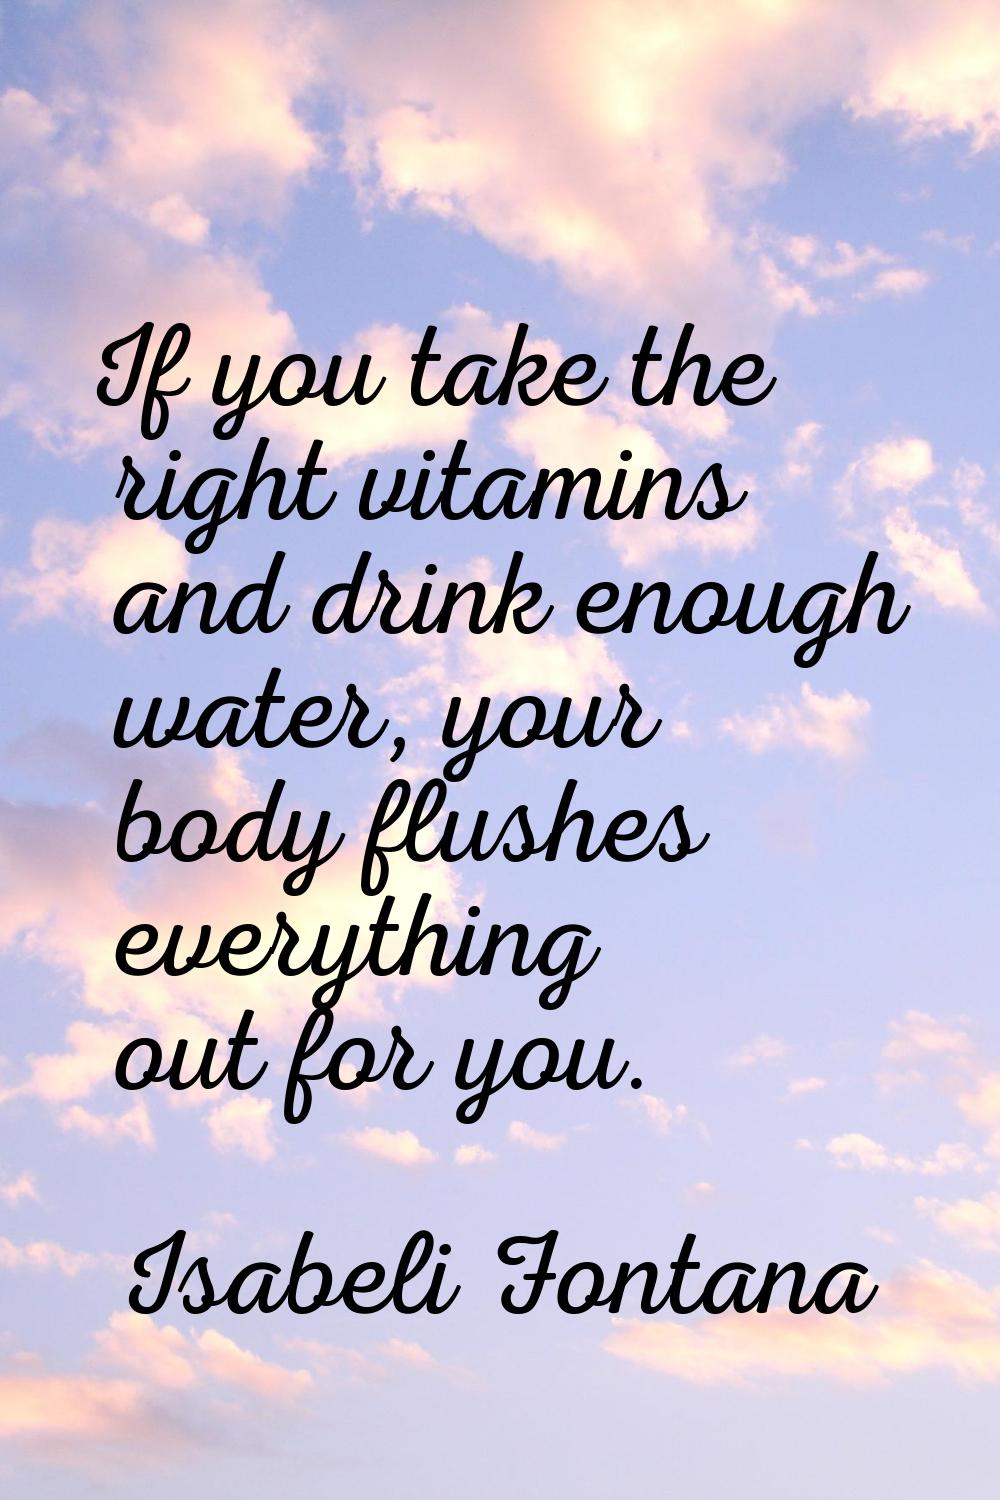 If you take the right vitamins and drink enough water, your body flushes everything out for you.